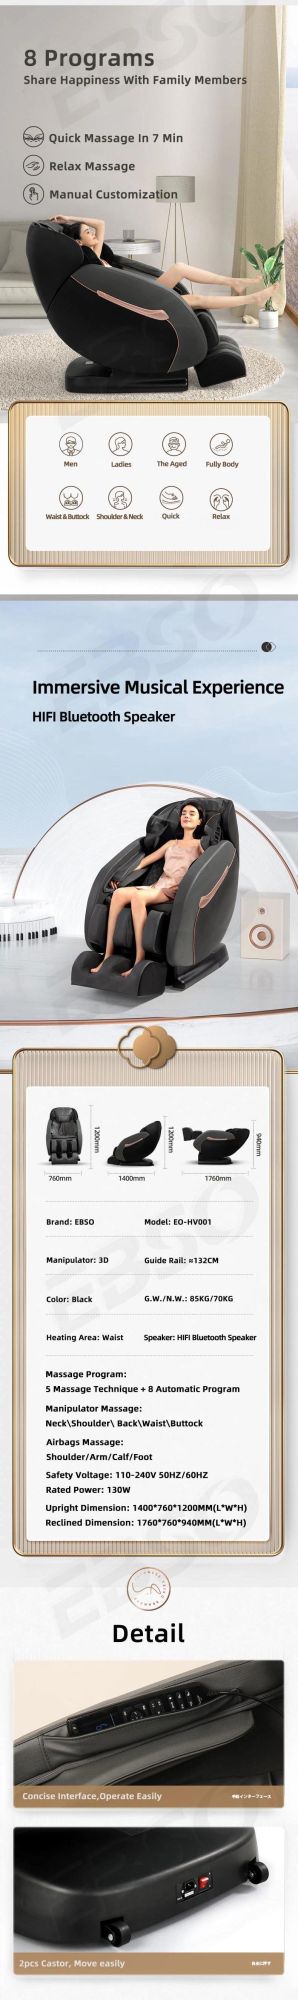 Best Sale Classy Electric Foot Leg Massage Gravity of Full Body Stretch Recliner Massage Chair